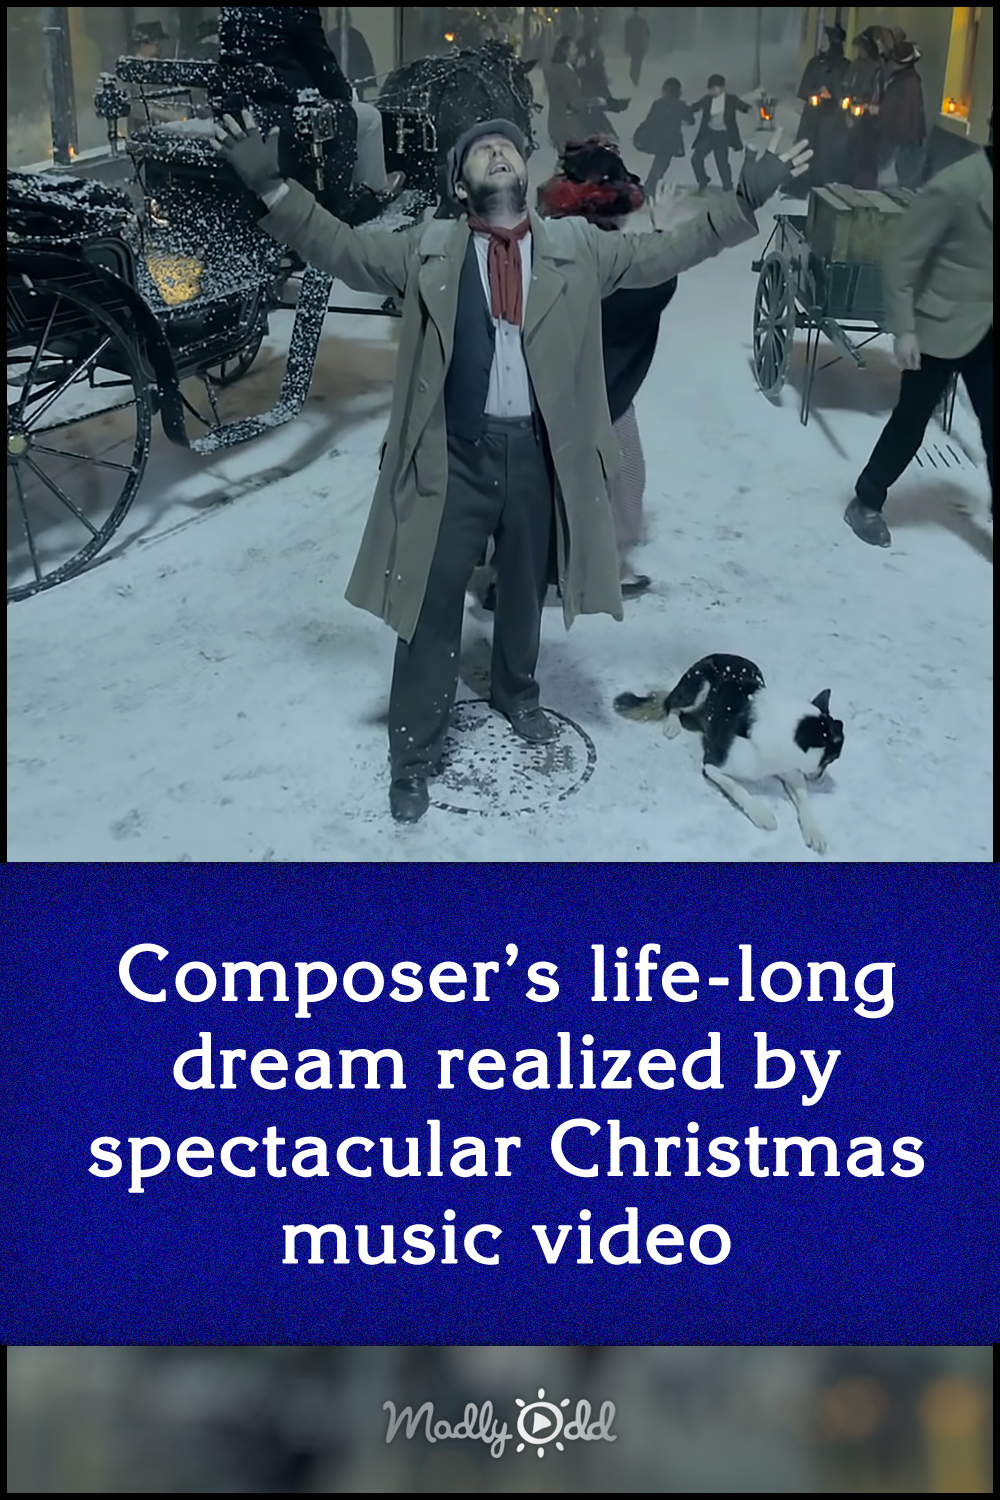 Composer’s life-long dream realized by spectacular Christmas music video